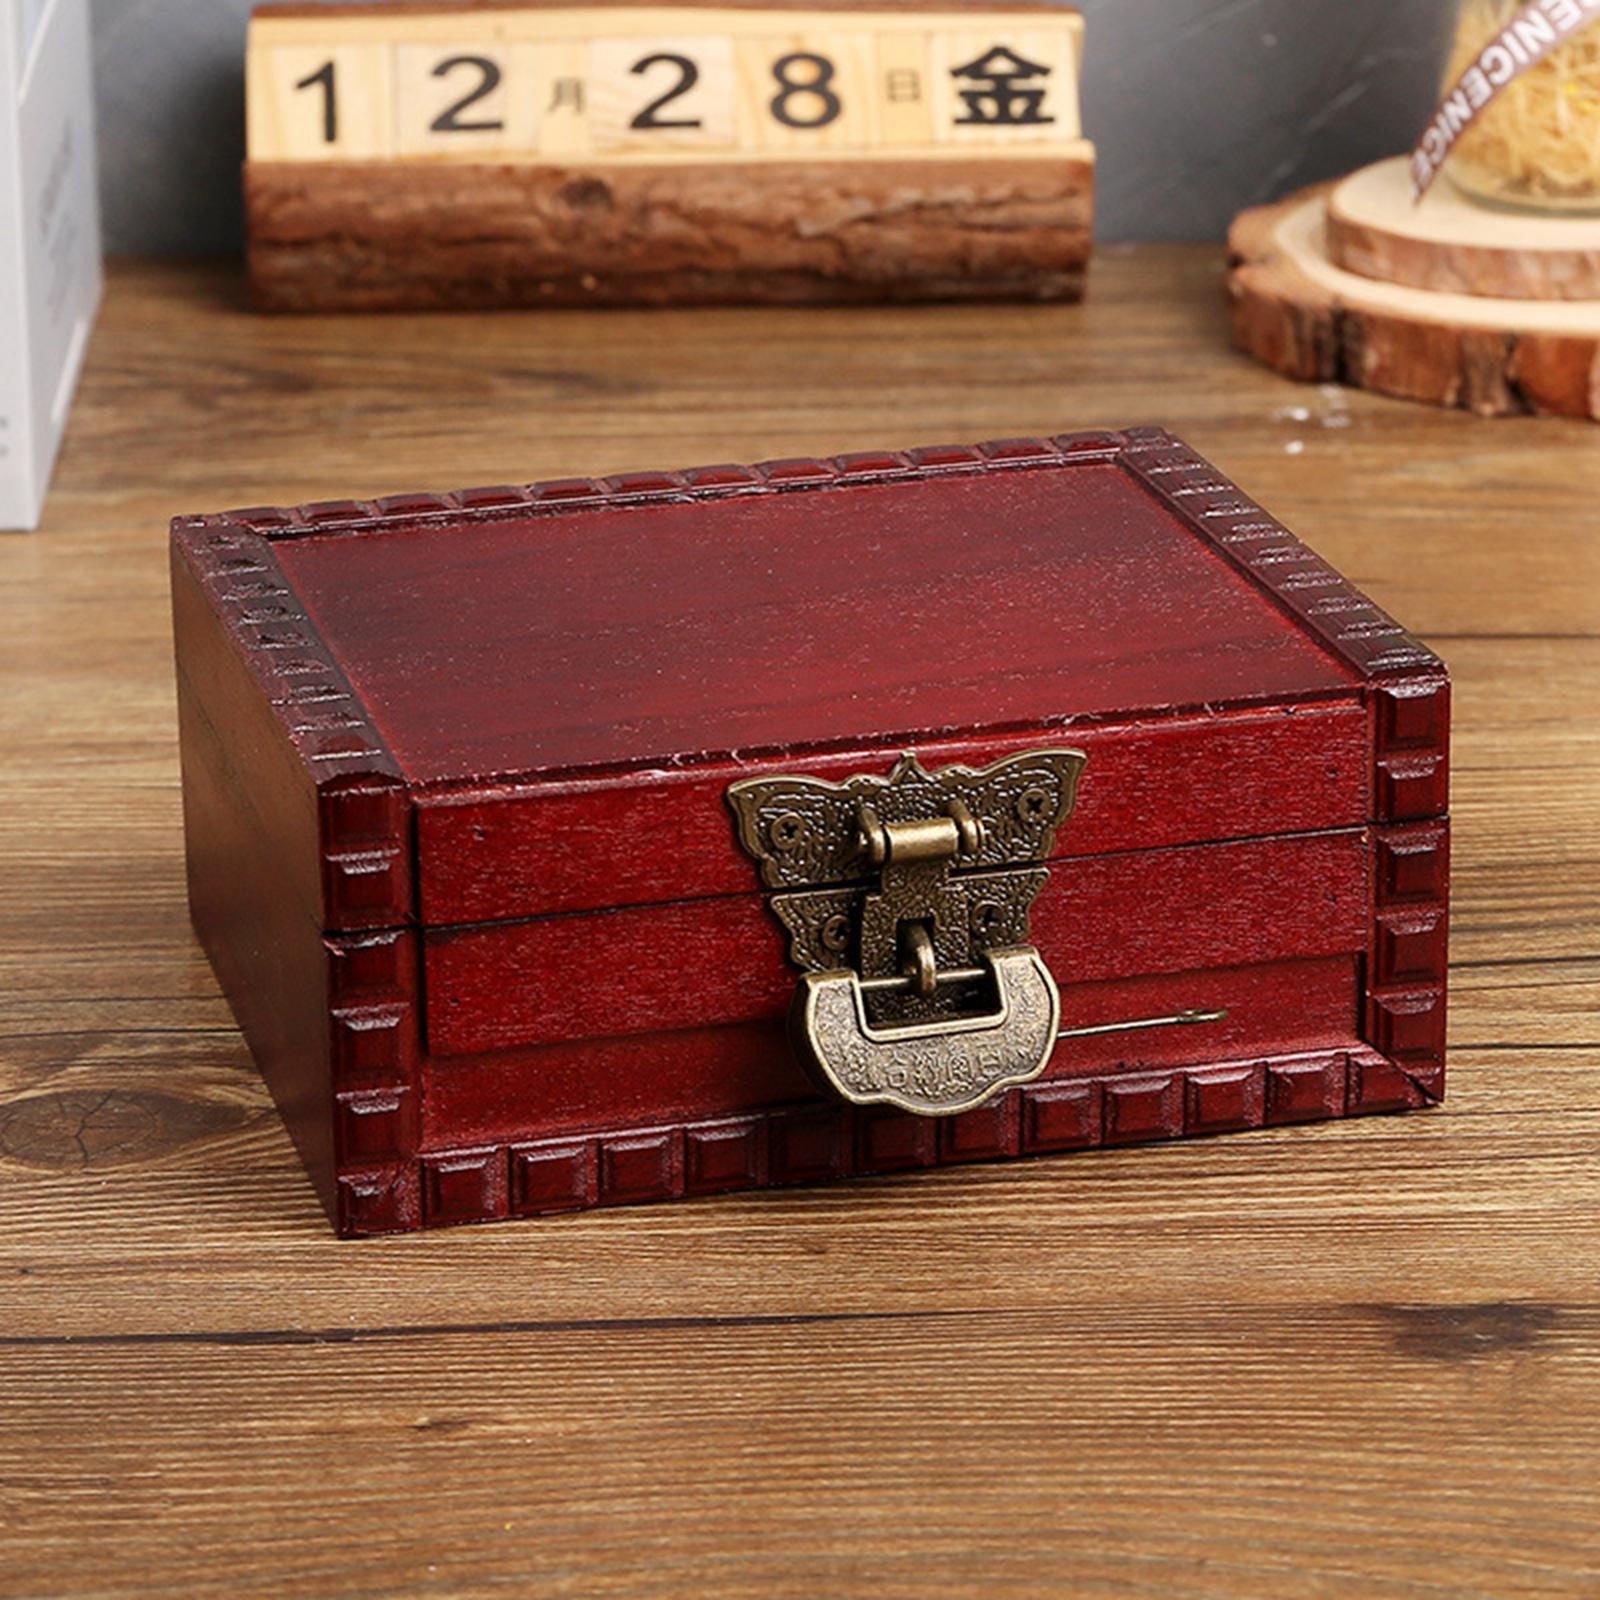 Vintage Style Wooden Box Decorative Jewelry Gift Storage Box with Lock with Lock